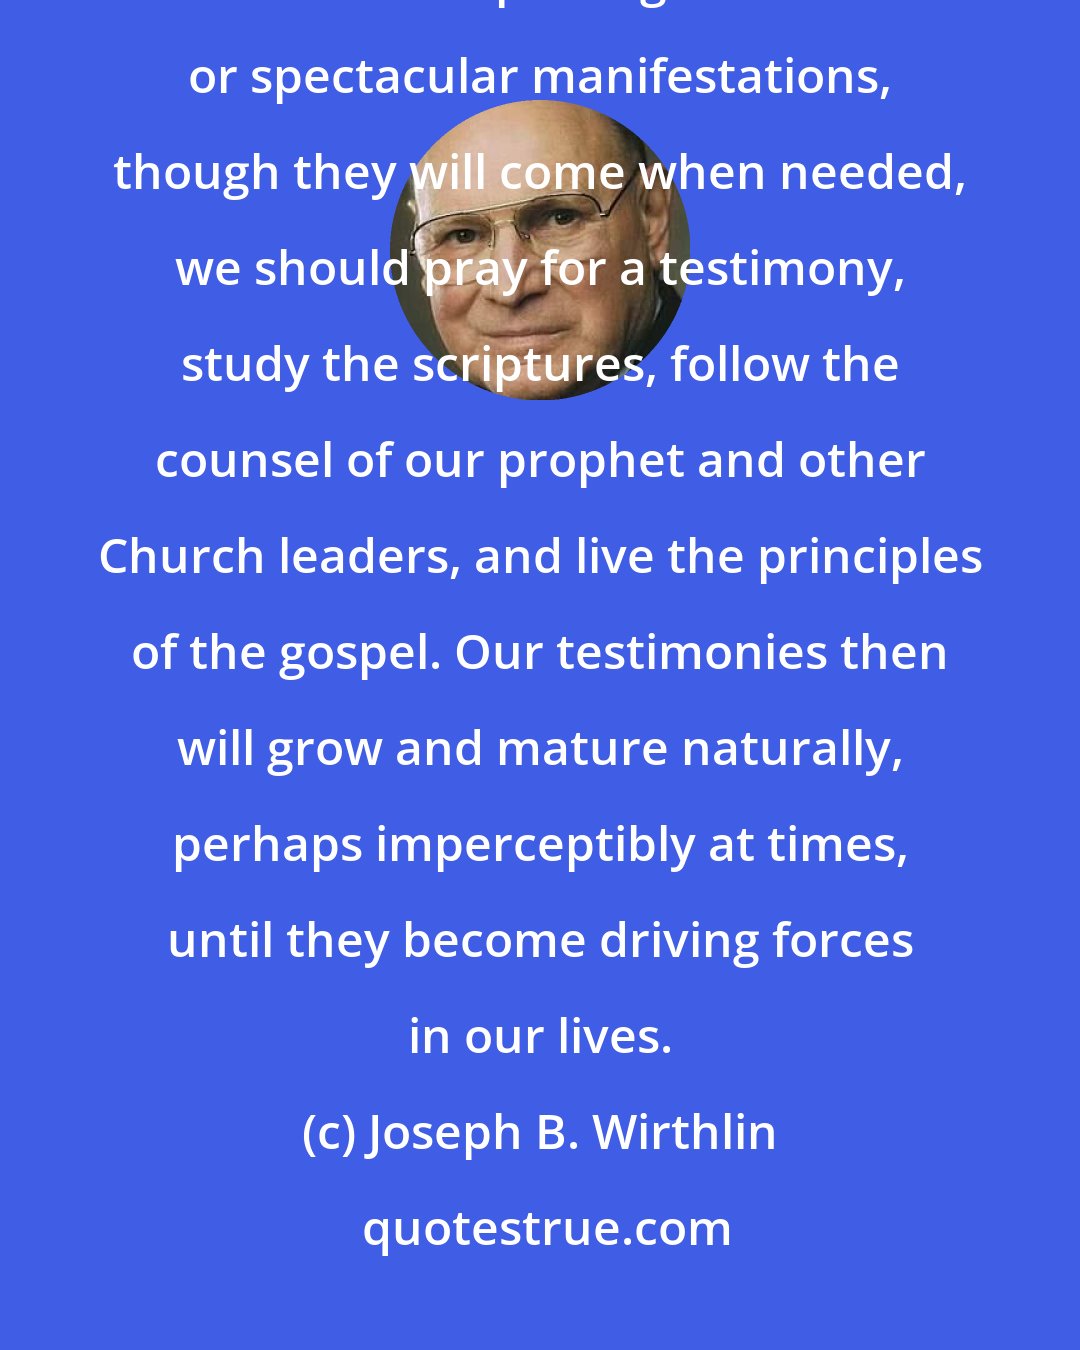 Joseph B. Wirthlin: We should be patient in developing and strengthening our testimonies. Rather than expecting immediate or spectacular manifestations, though they will come when needed, we should pray for a testimony, study the scriptures, follow the counsel of our prophet and other Church leaders, and live the principles of the gospel. Our testimonies then will grow and mature naturally, perhaps imperceptibly at times, until they become driving forces in our lives.